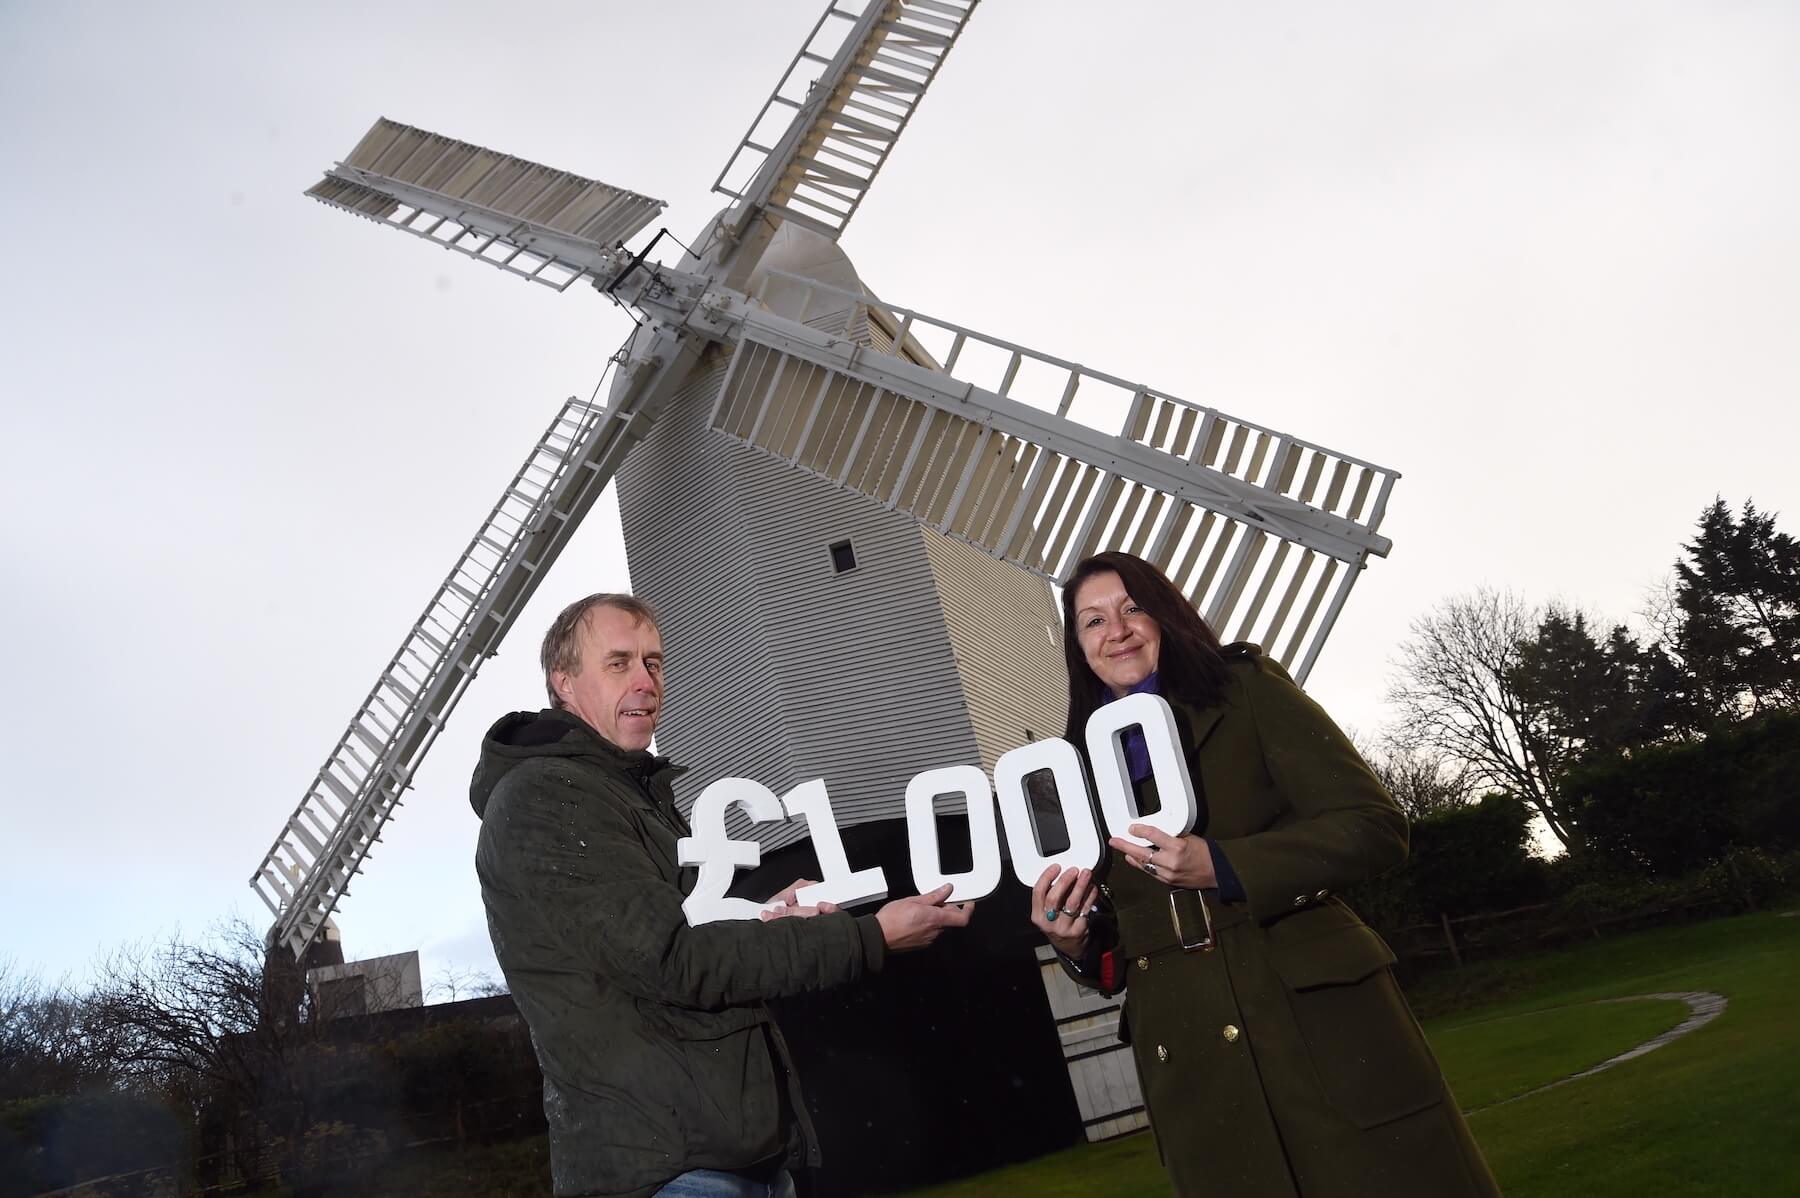 Jack and Jill Windmills Society receive 1000 donation as Taylor Wimpey Community Chest winners